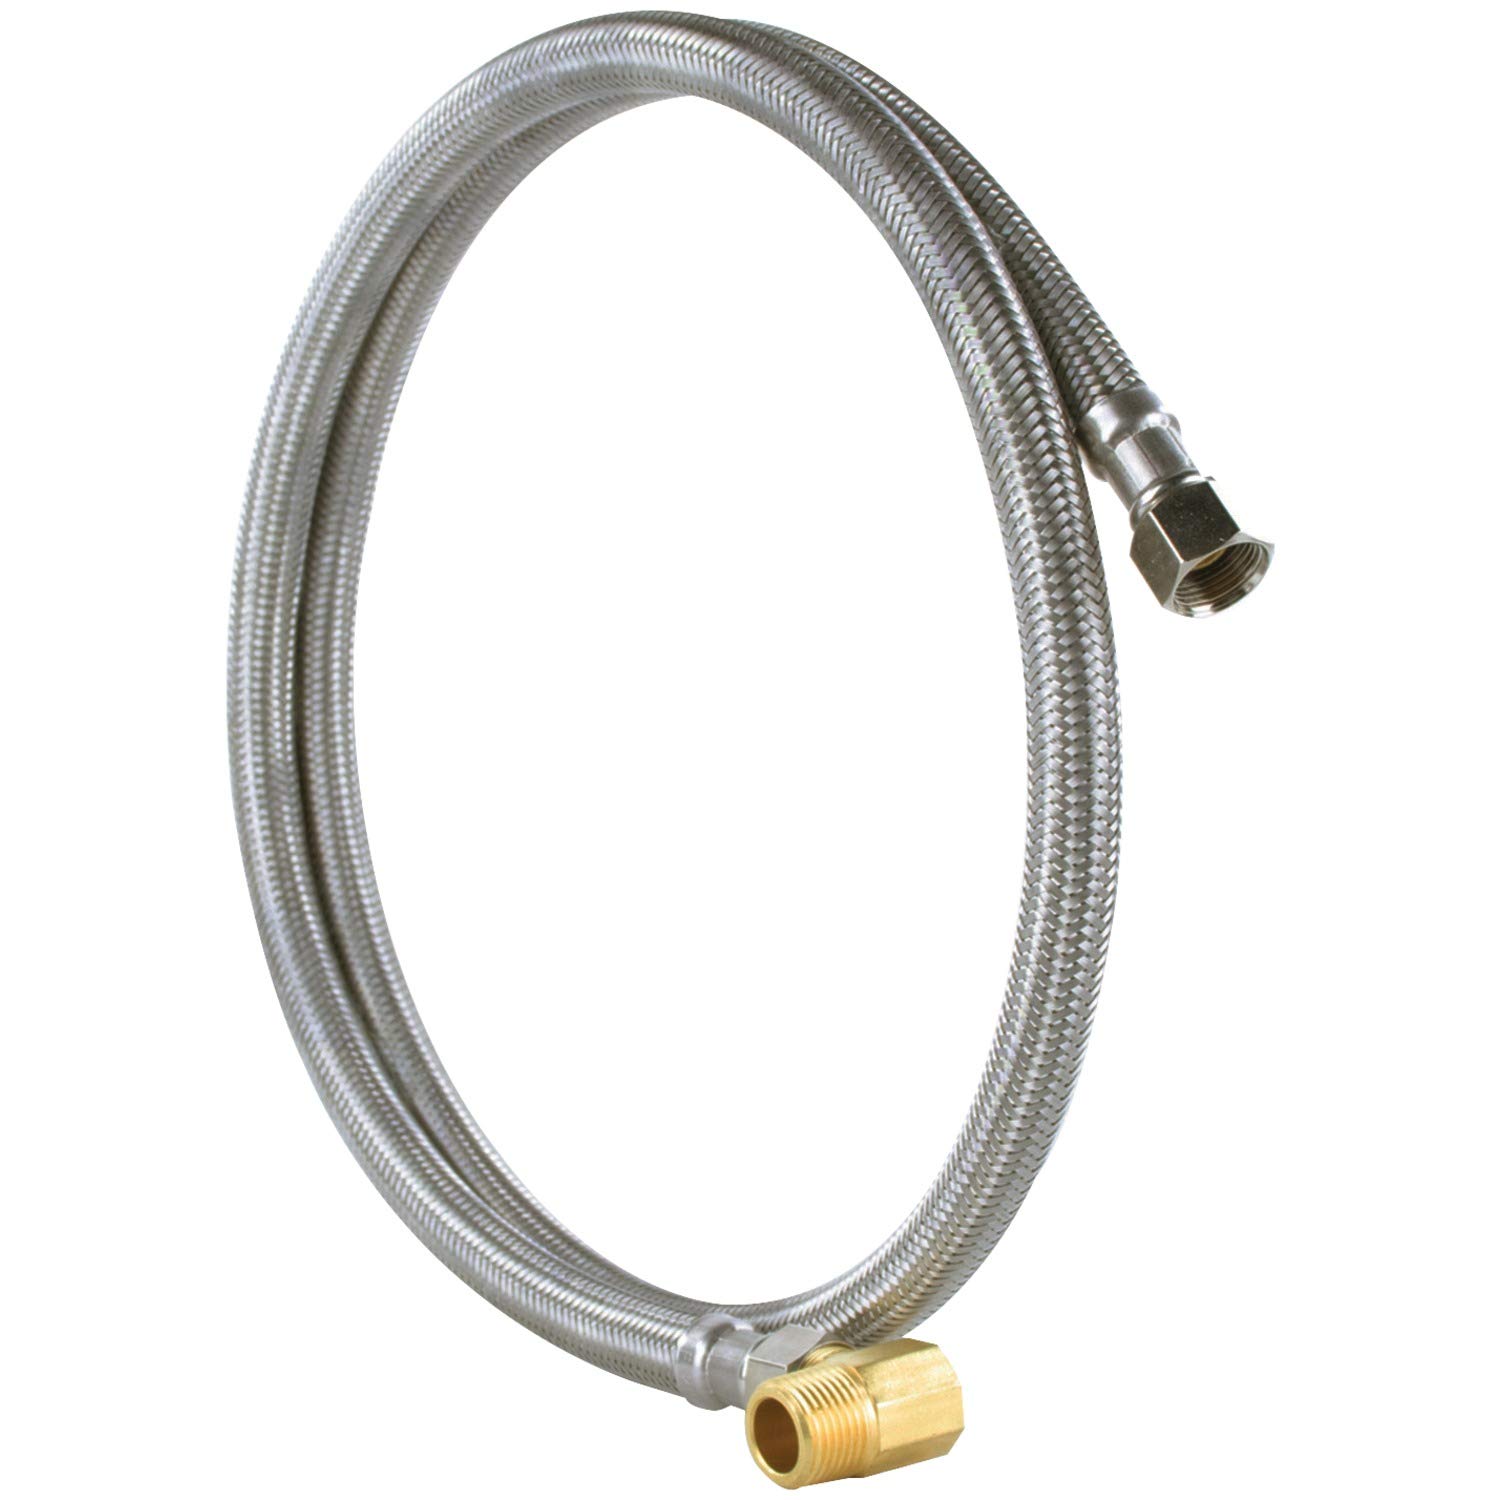 Certified Appliance Accessories Dishwasher Hose with 90 Degree MIP Elbow, Water Supply Line, 10 Feet, PVC Core with Premium Braided Stainless Steel, DW120SSBL